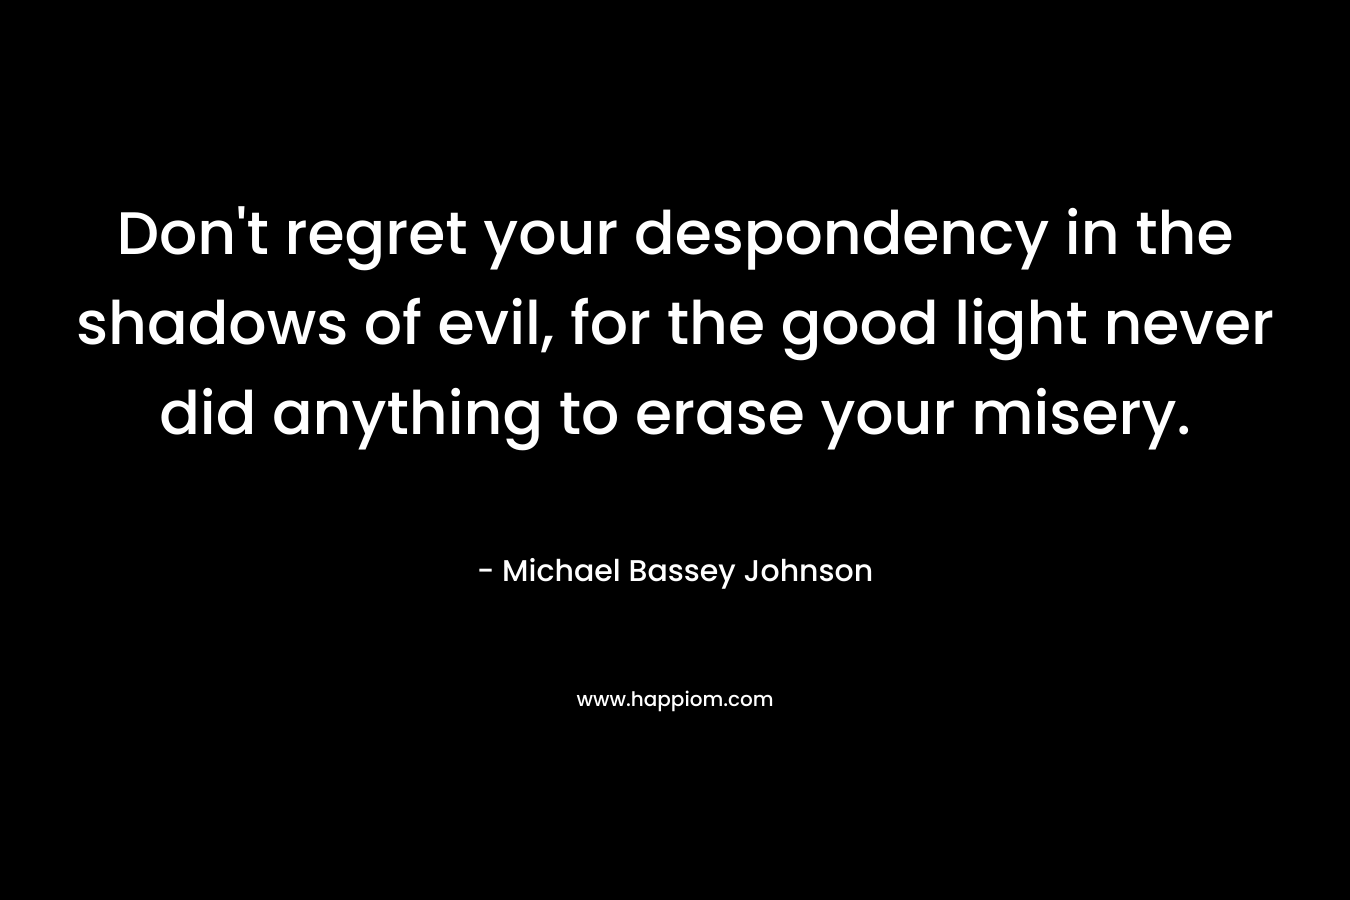 Don’t regret your despondency in the shadows of evil, for the good light never did anything to erase your misery. – Michael Bassey Johnson